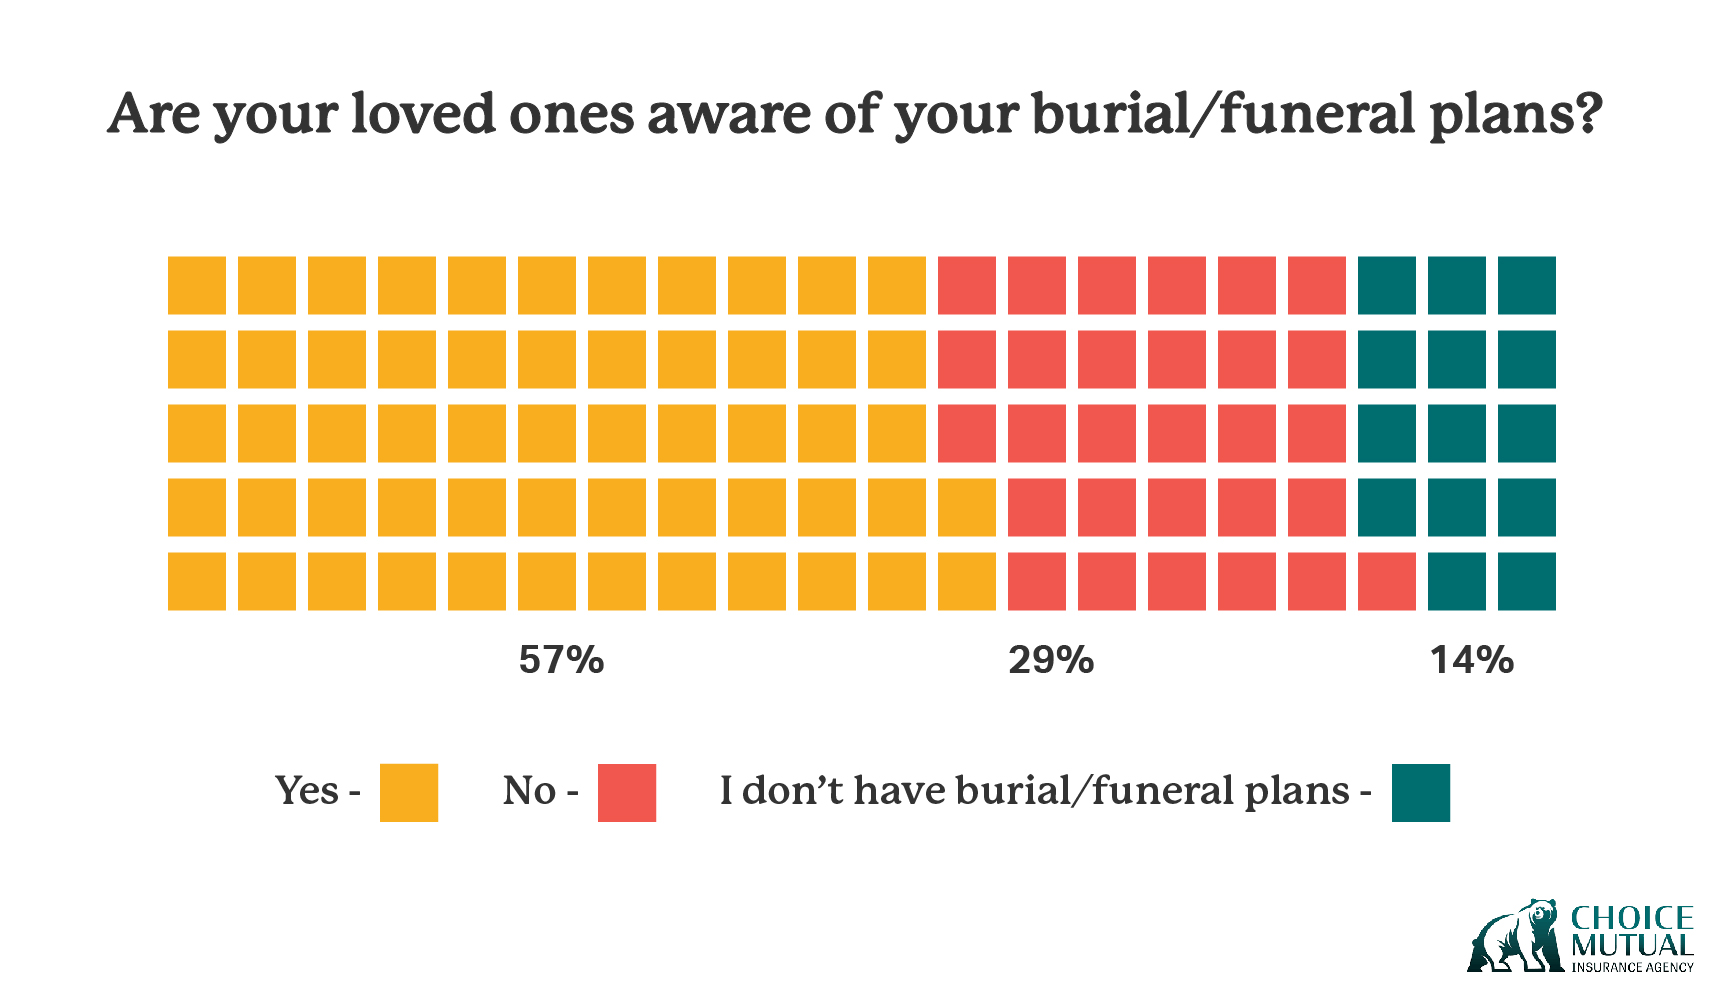 A chart showing what percentage of people's loved ones are aware of their end-of-life plans